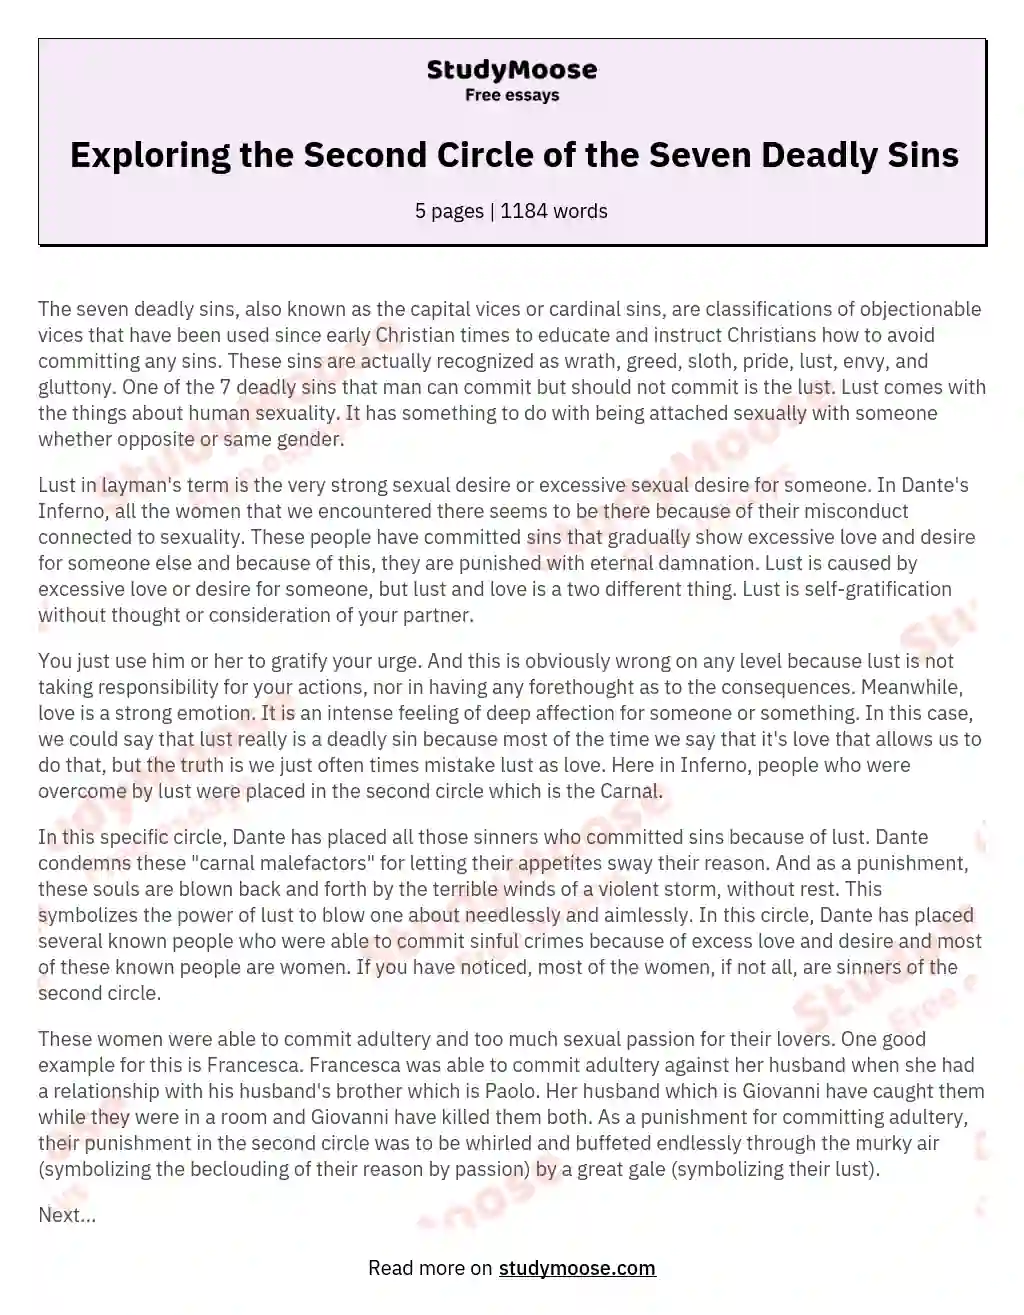 Exploring the Second Circle of the Seven Deadly Sins essay